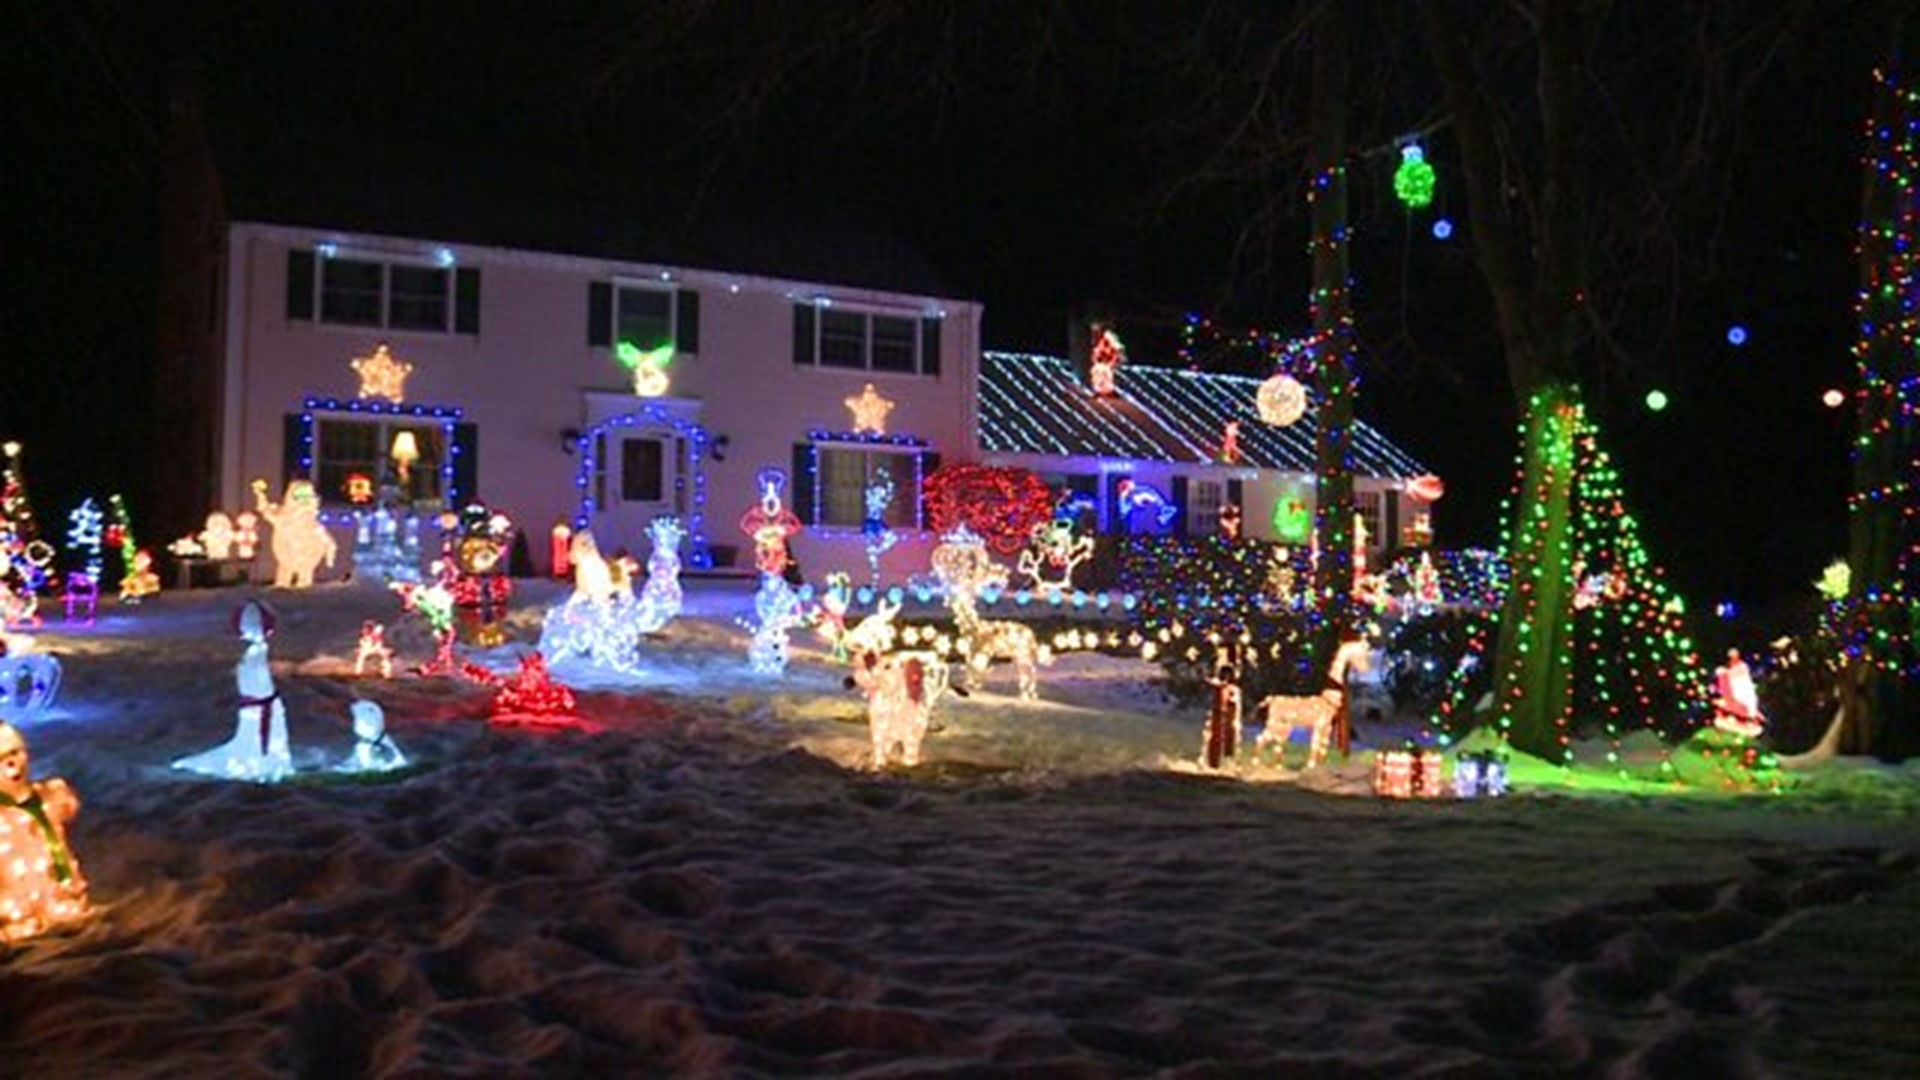 Christmas decorations back up and running after Simsbury home vandalized